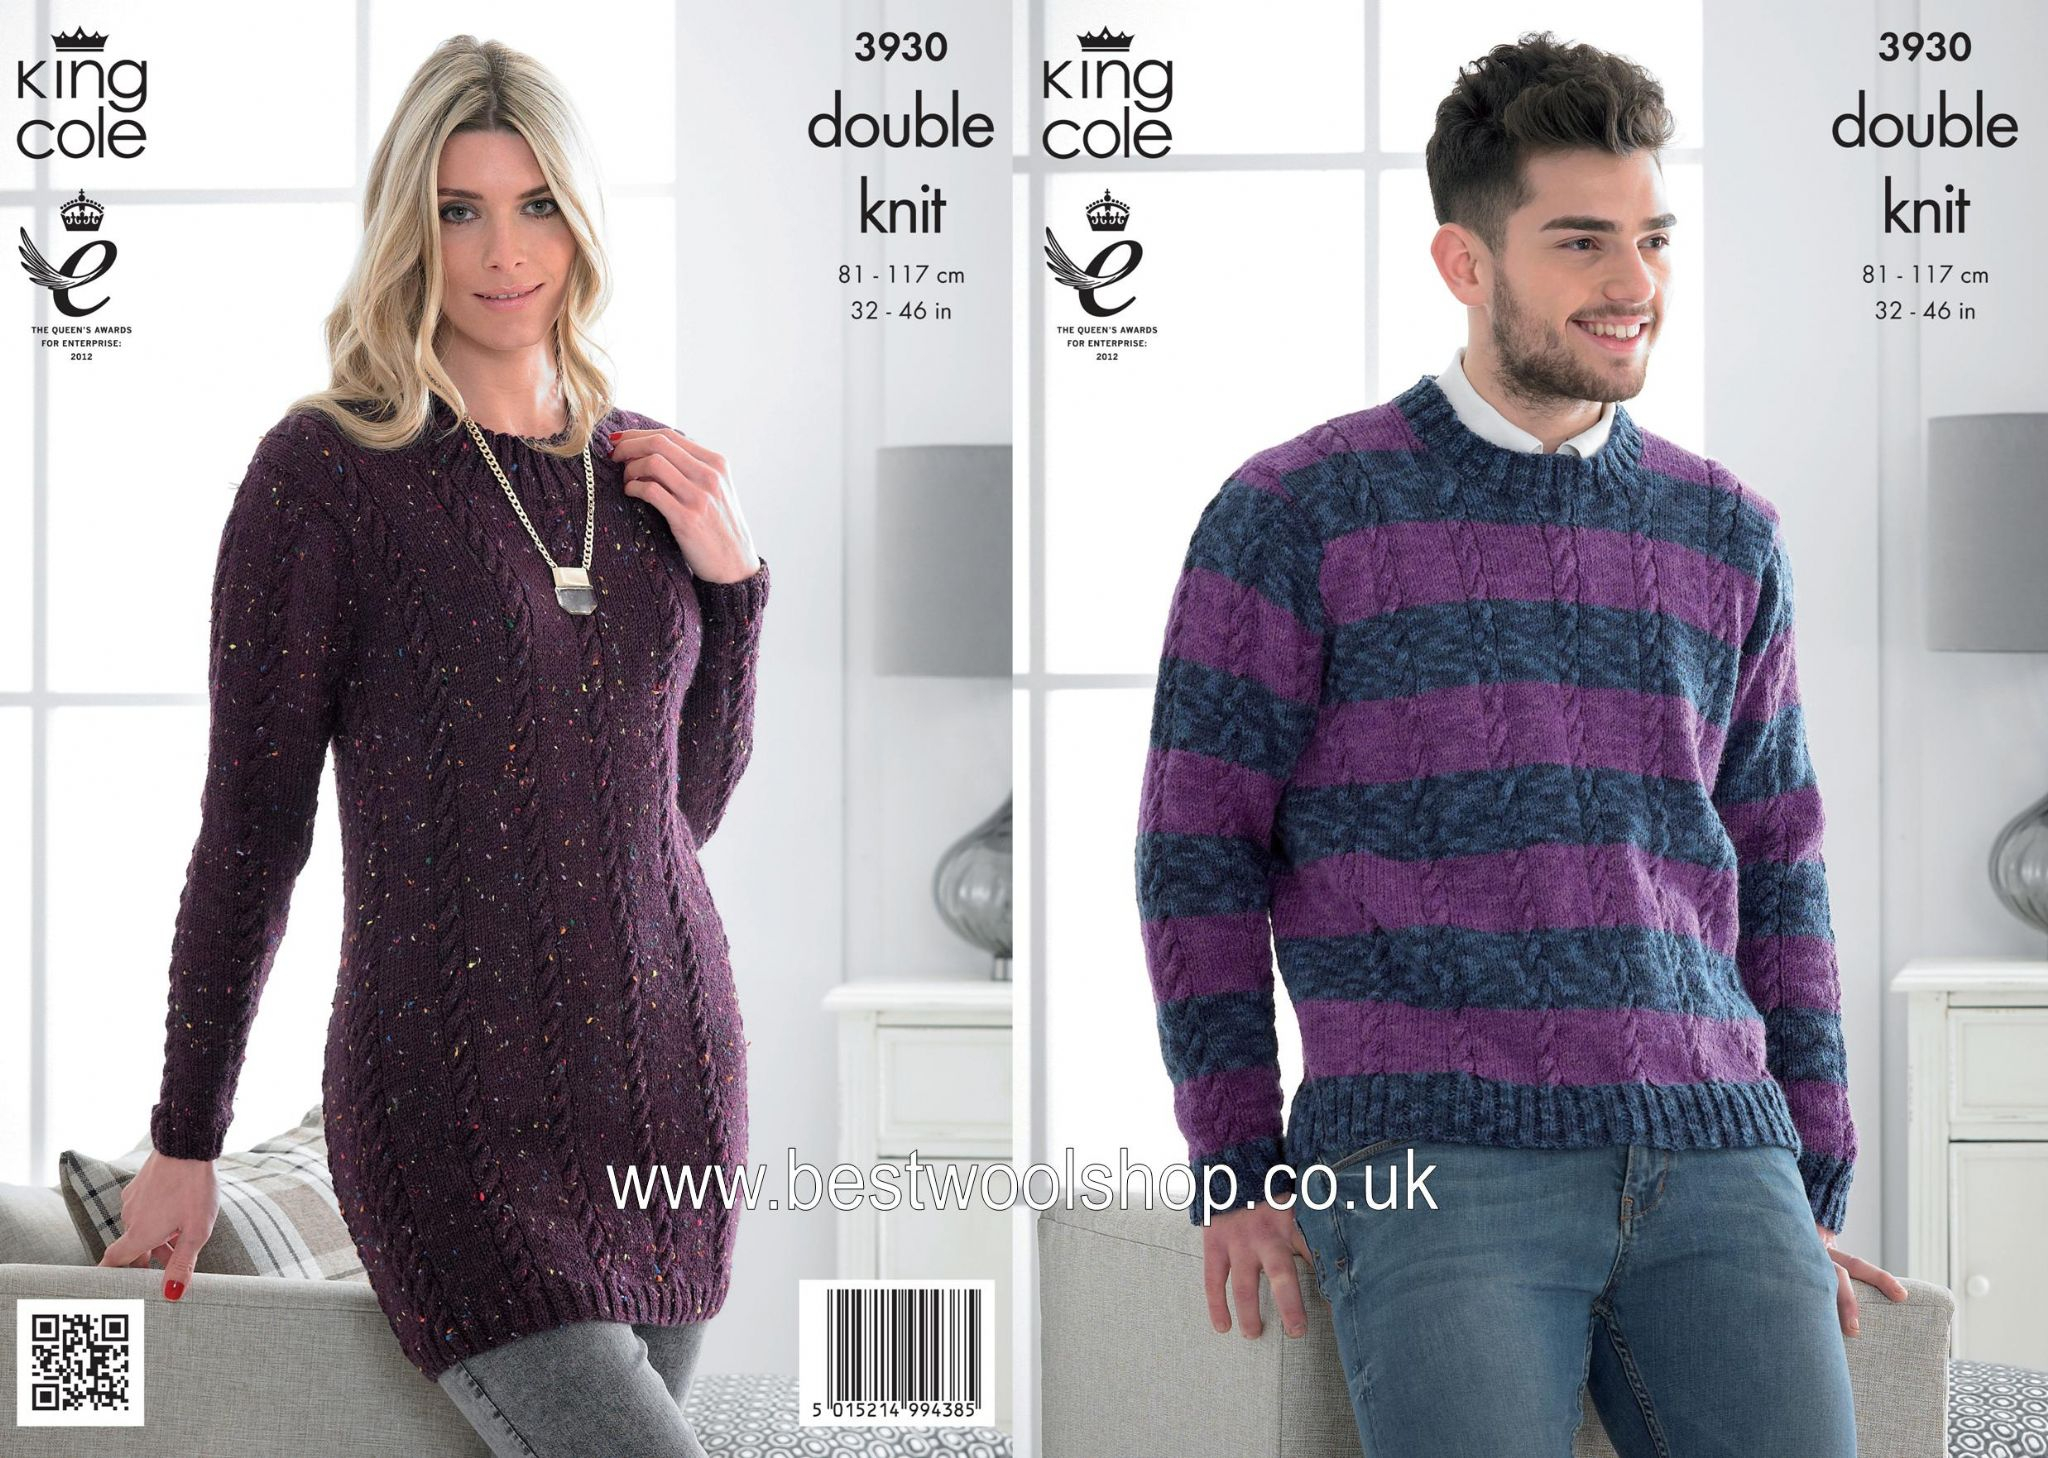 Knitting Pattern Dress 3930 King Cole Moods Dk Mens Sweater Ladies Sweater Dress Tunic Knitting Pattern To Fit Chest 32 To 46